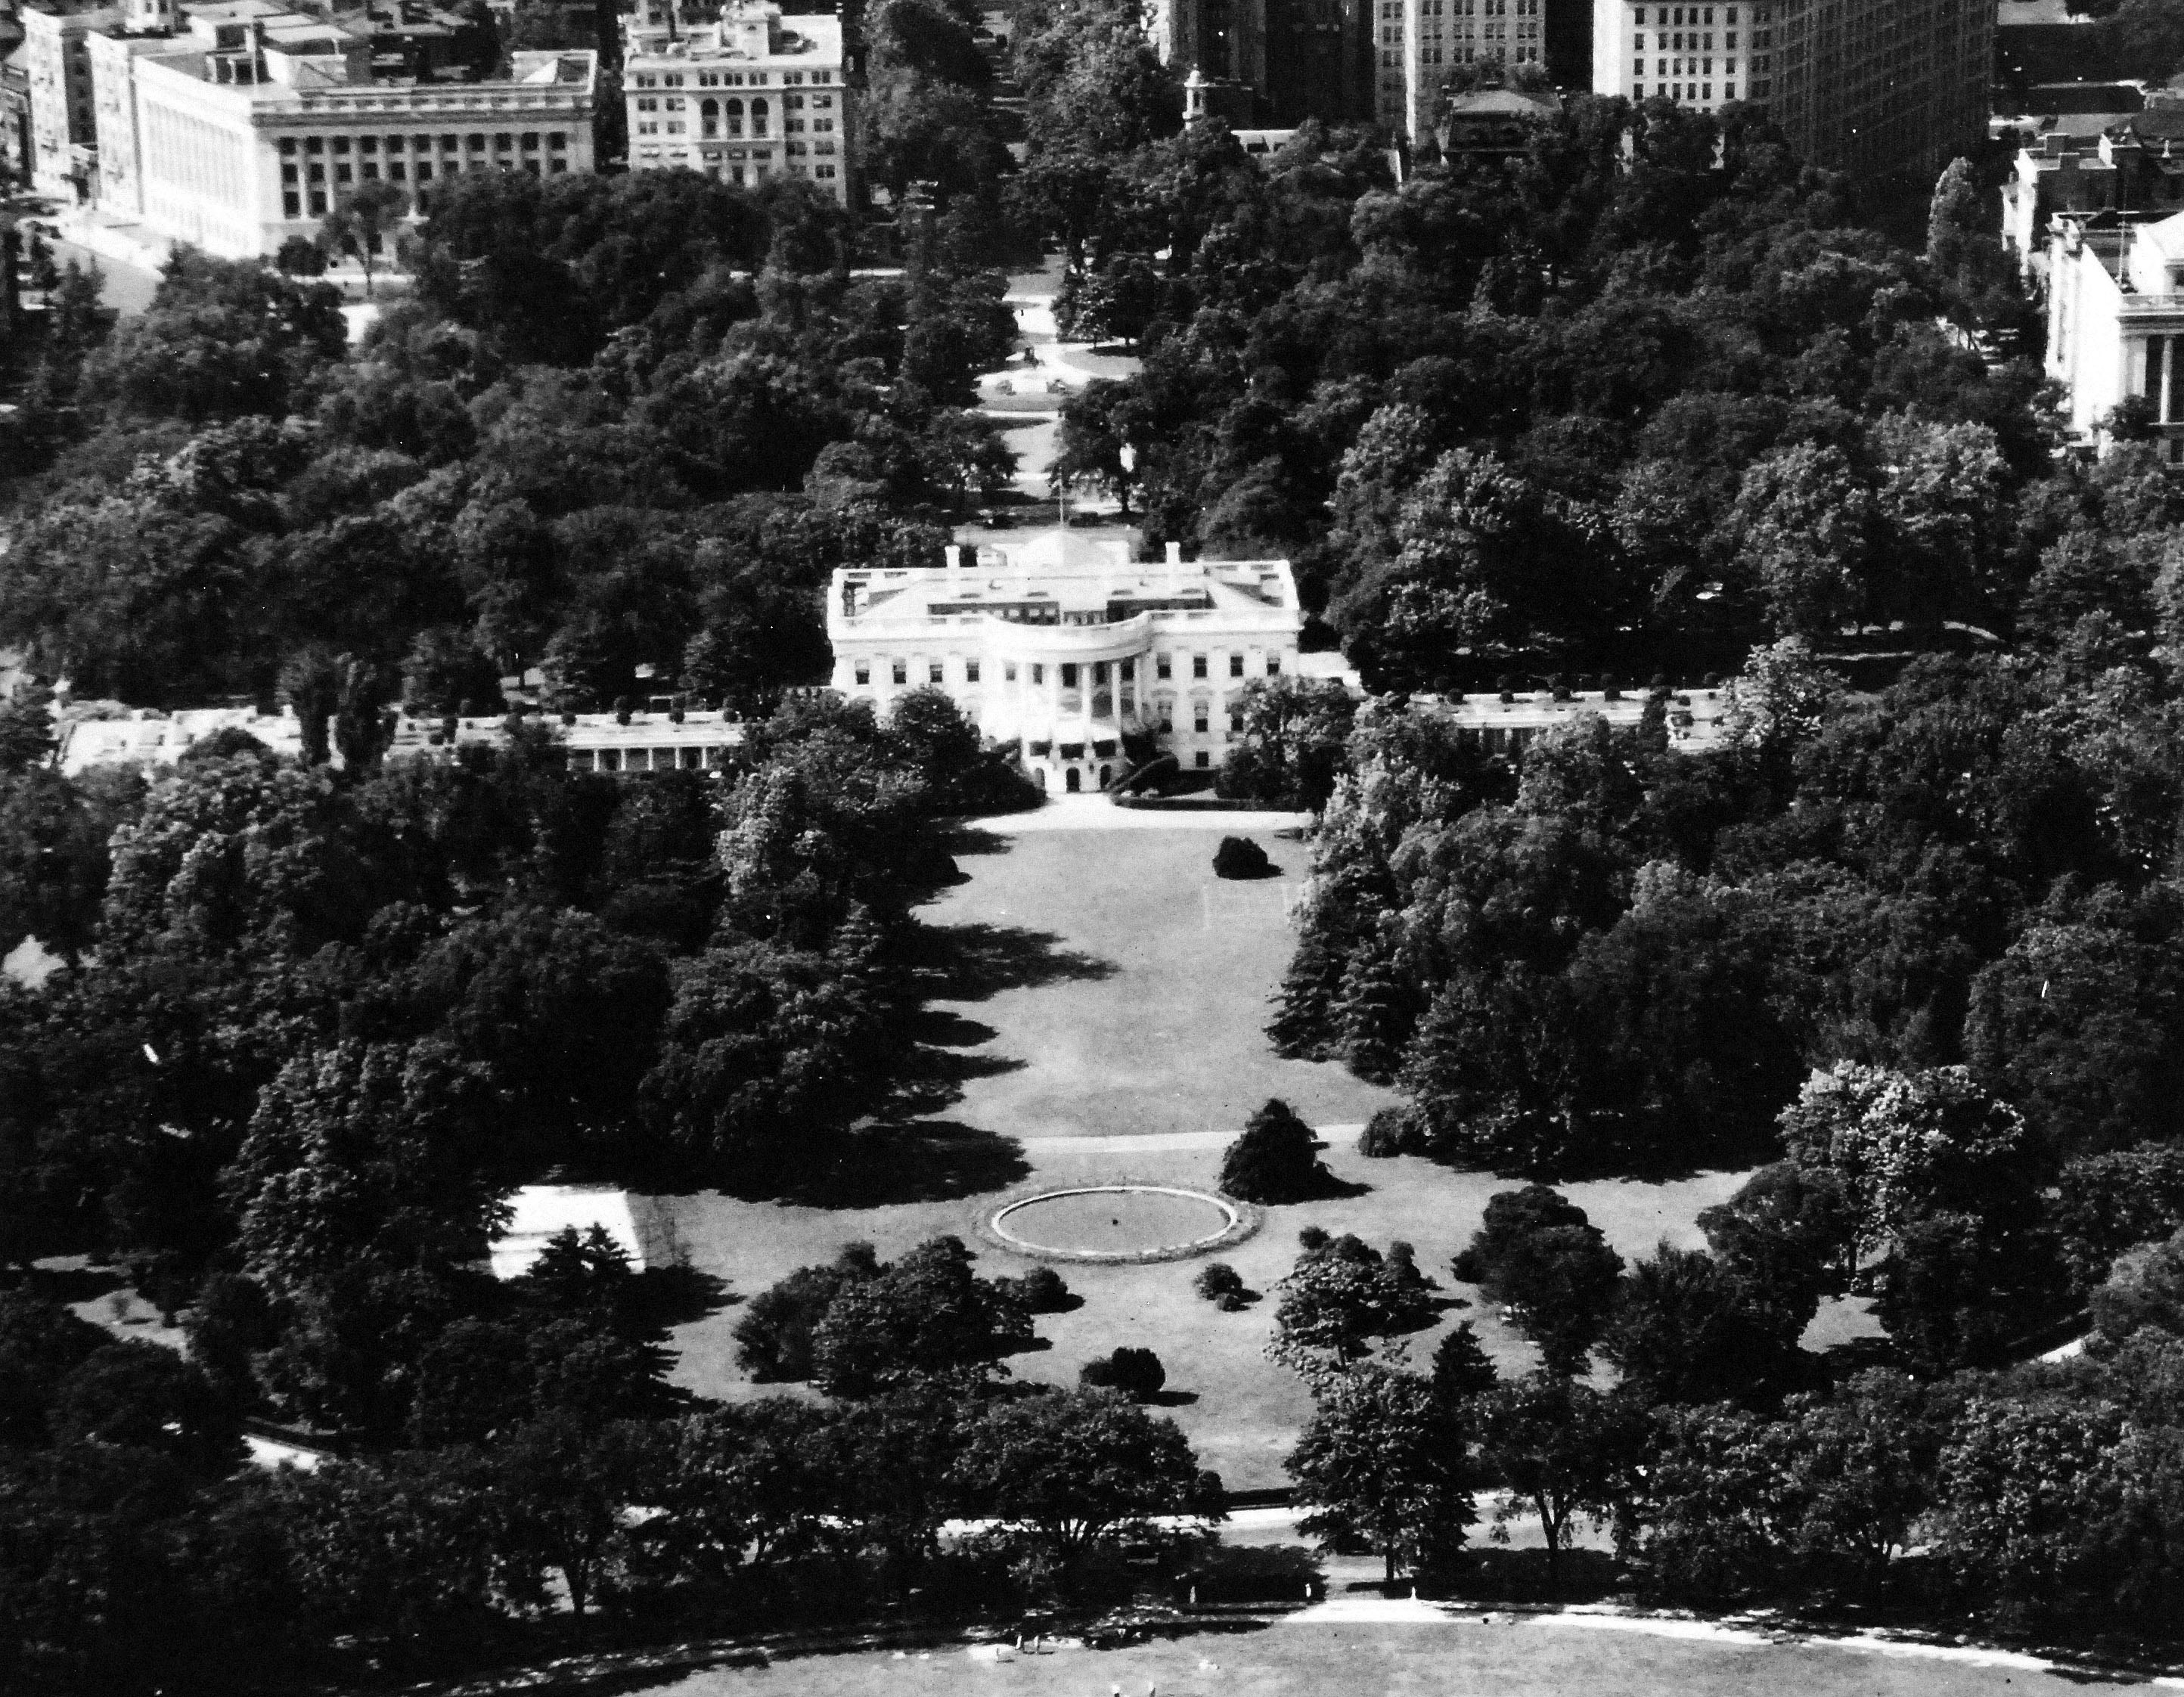 Aerial view of the White House, Washington DC, United States, 23 Oct 1940.